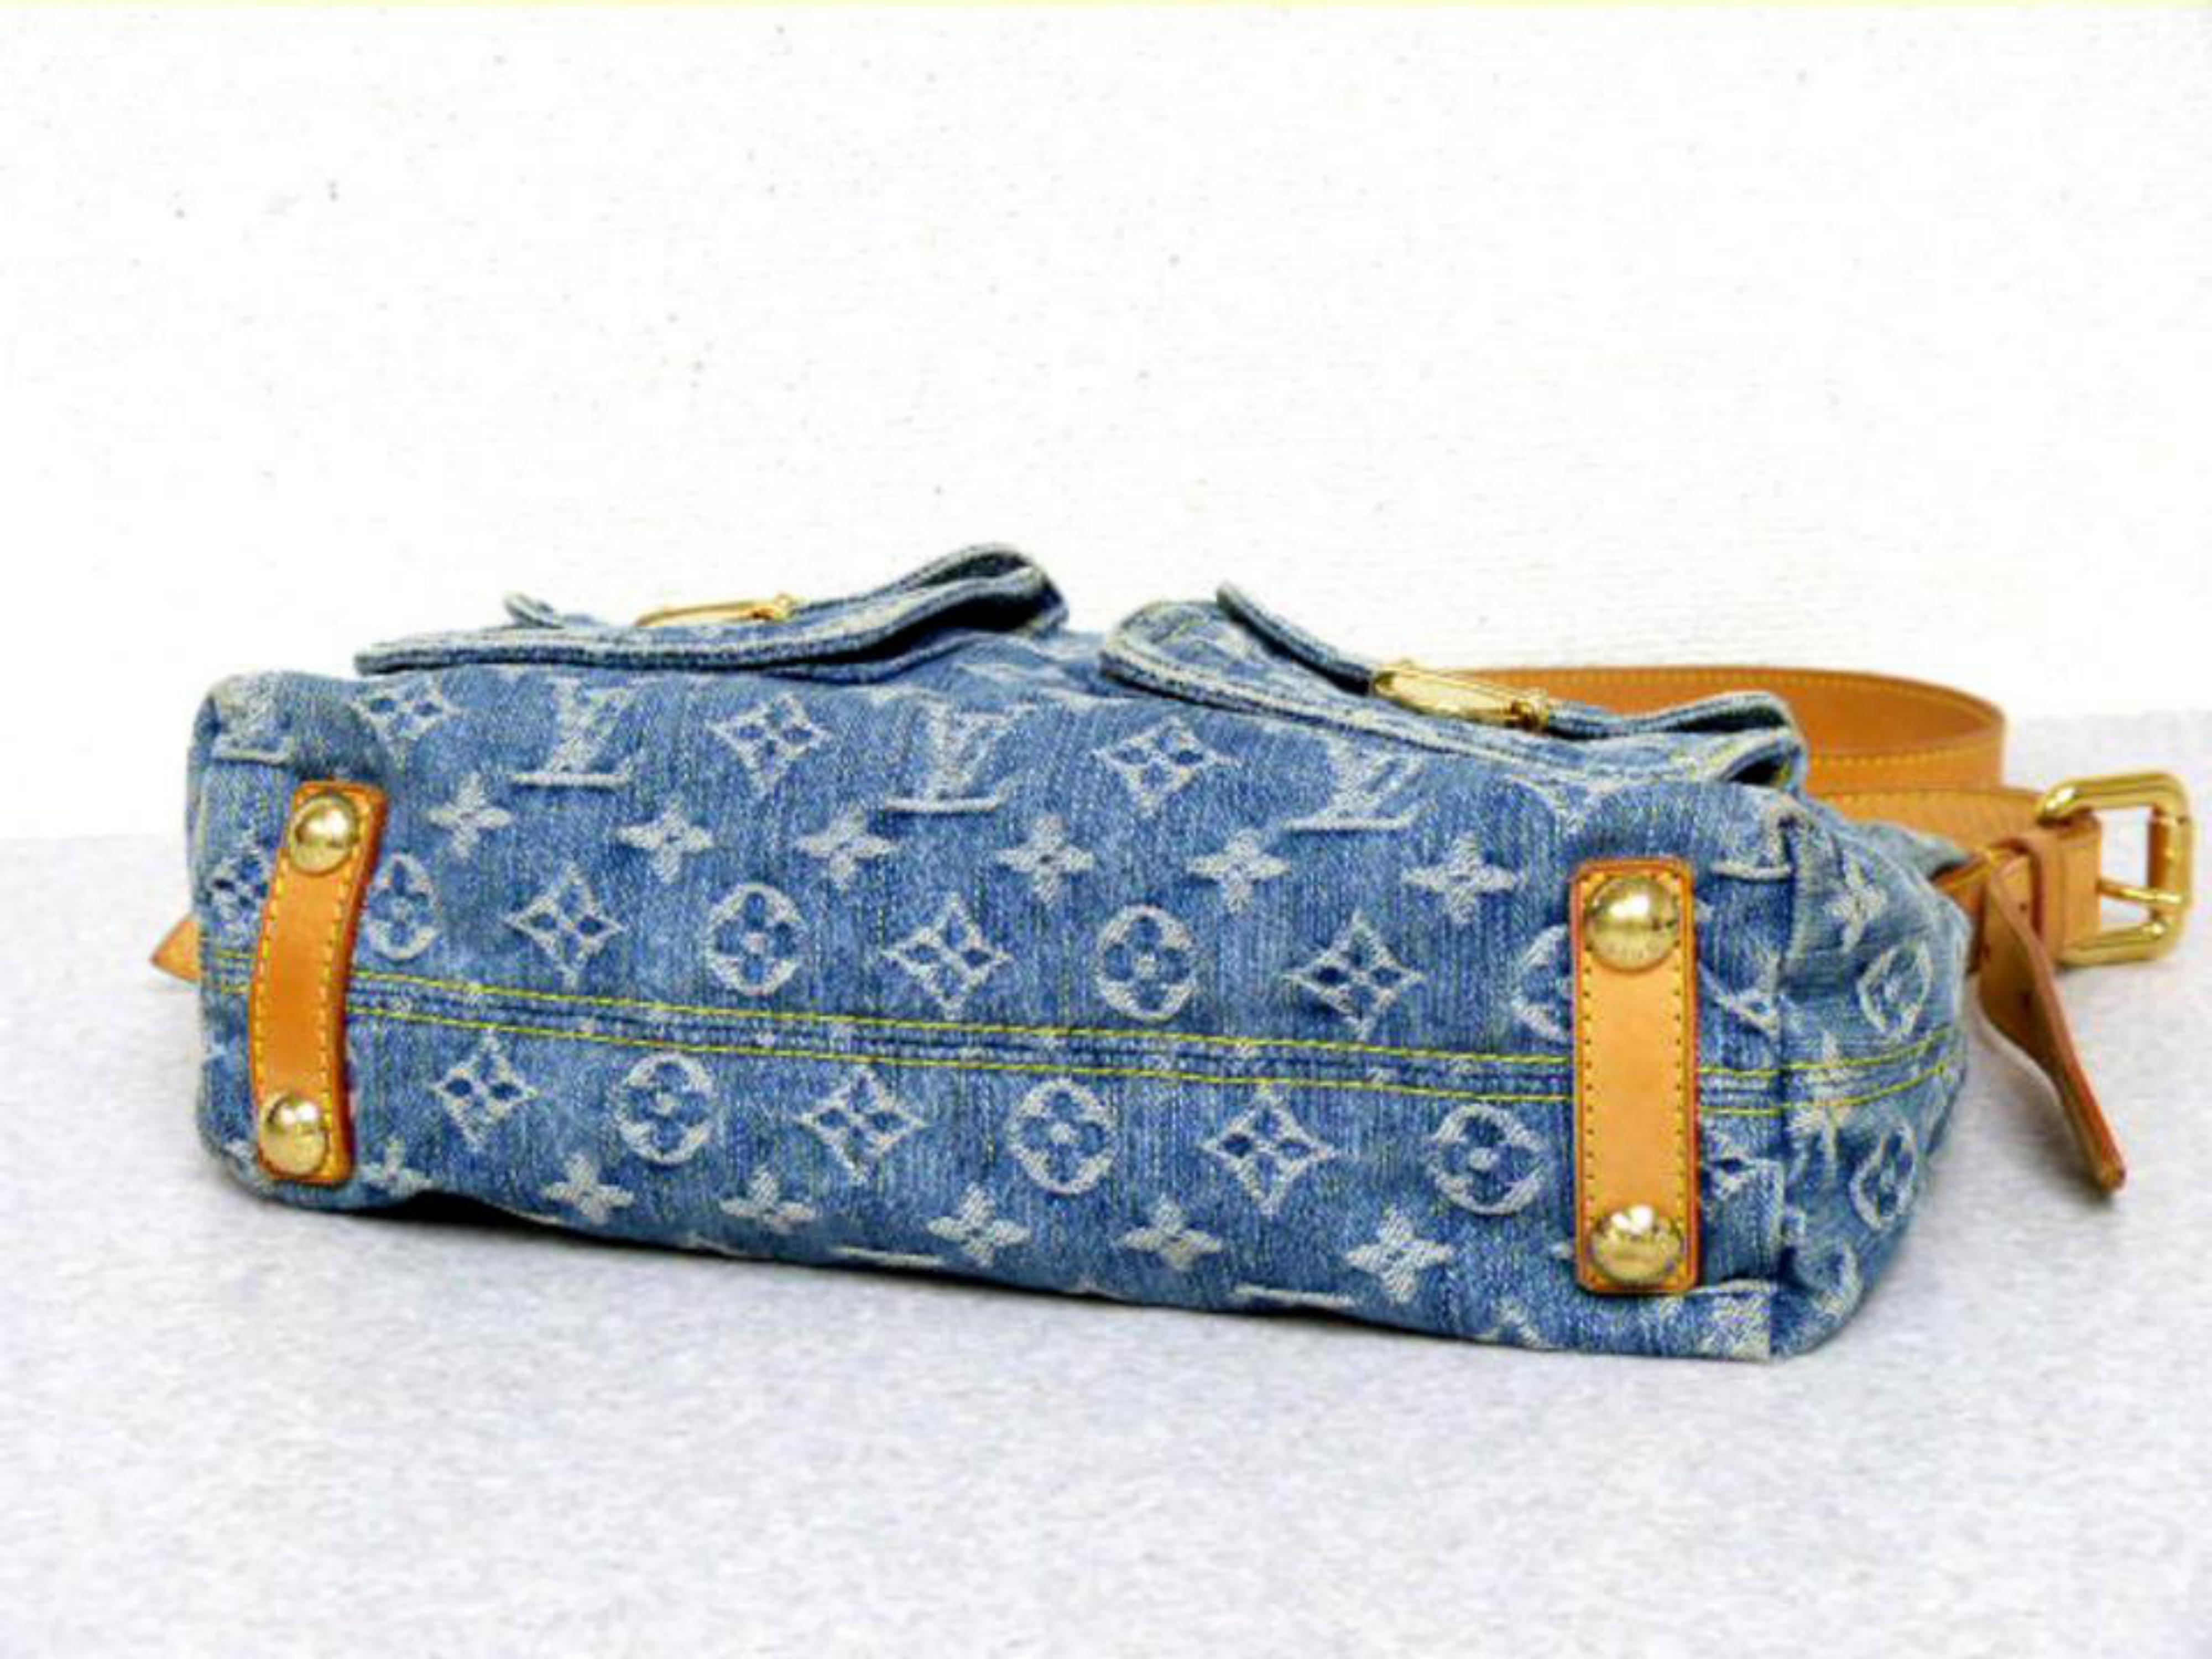 Louis Vuitton Baggy Monogram Denim 228144 Blue Coated Canvas Cross Body Bag In Good Condition For Sale In Forest Hills, NY